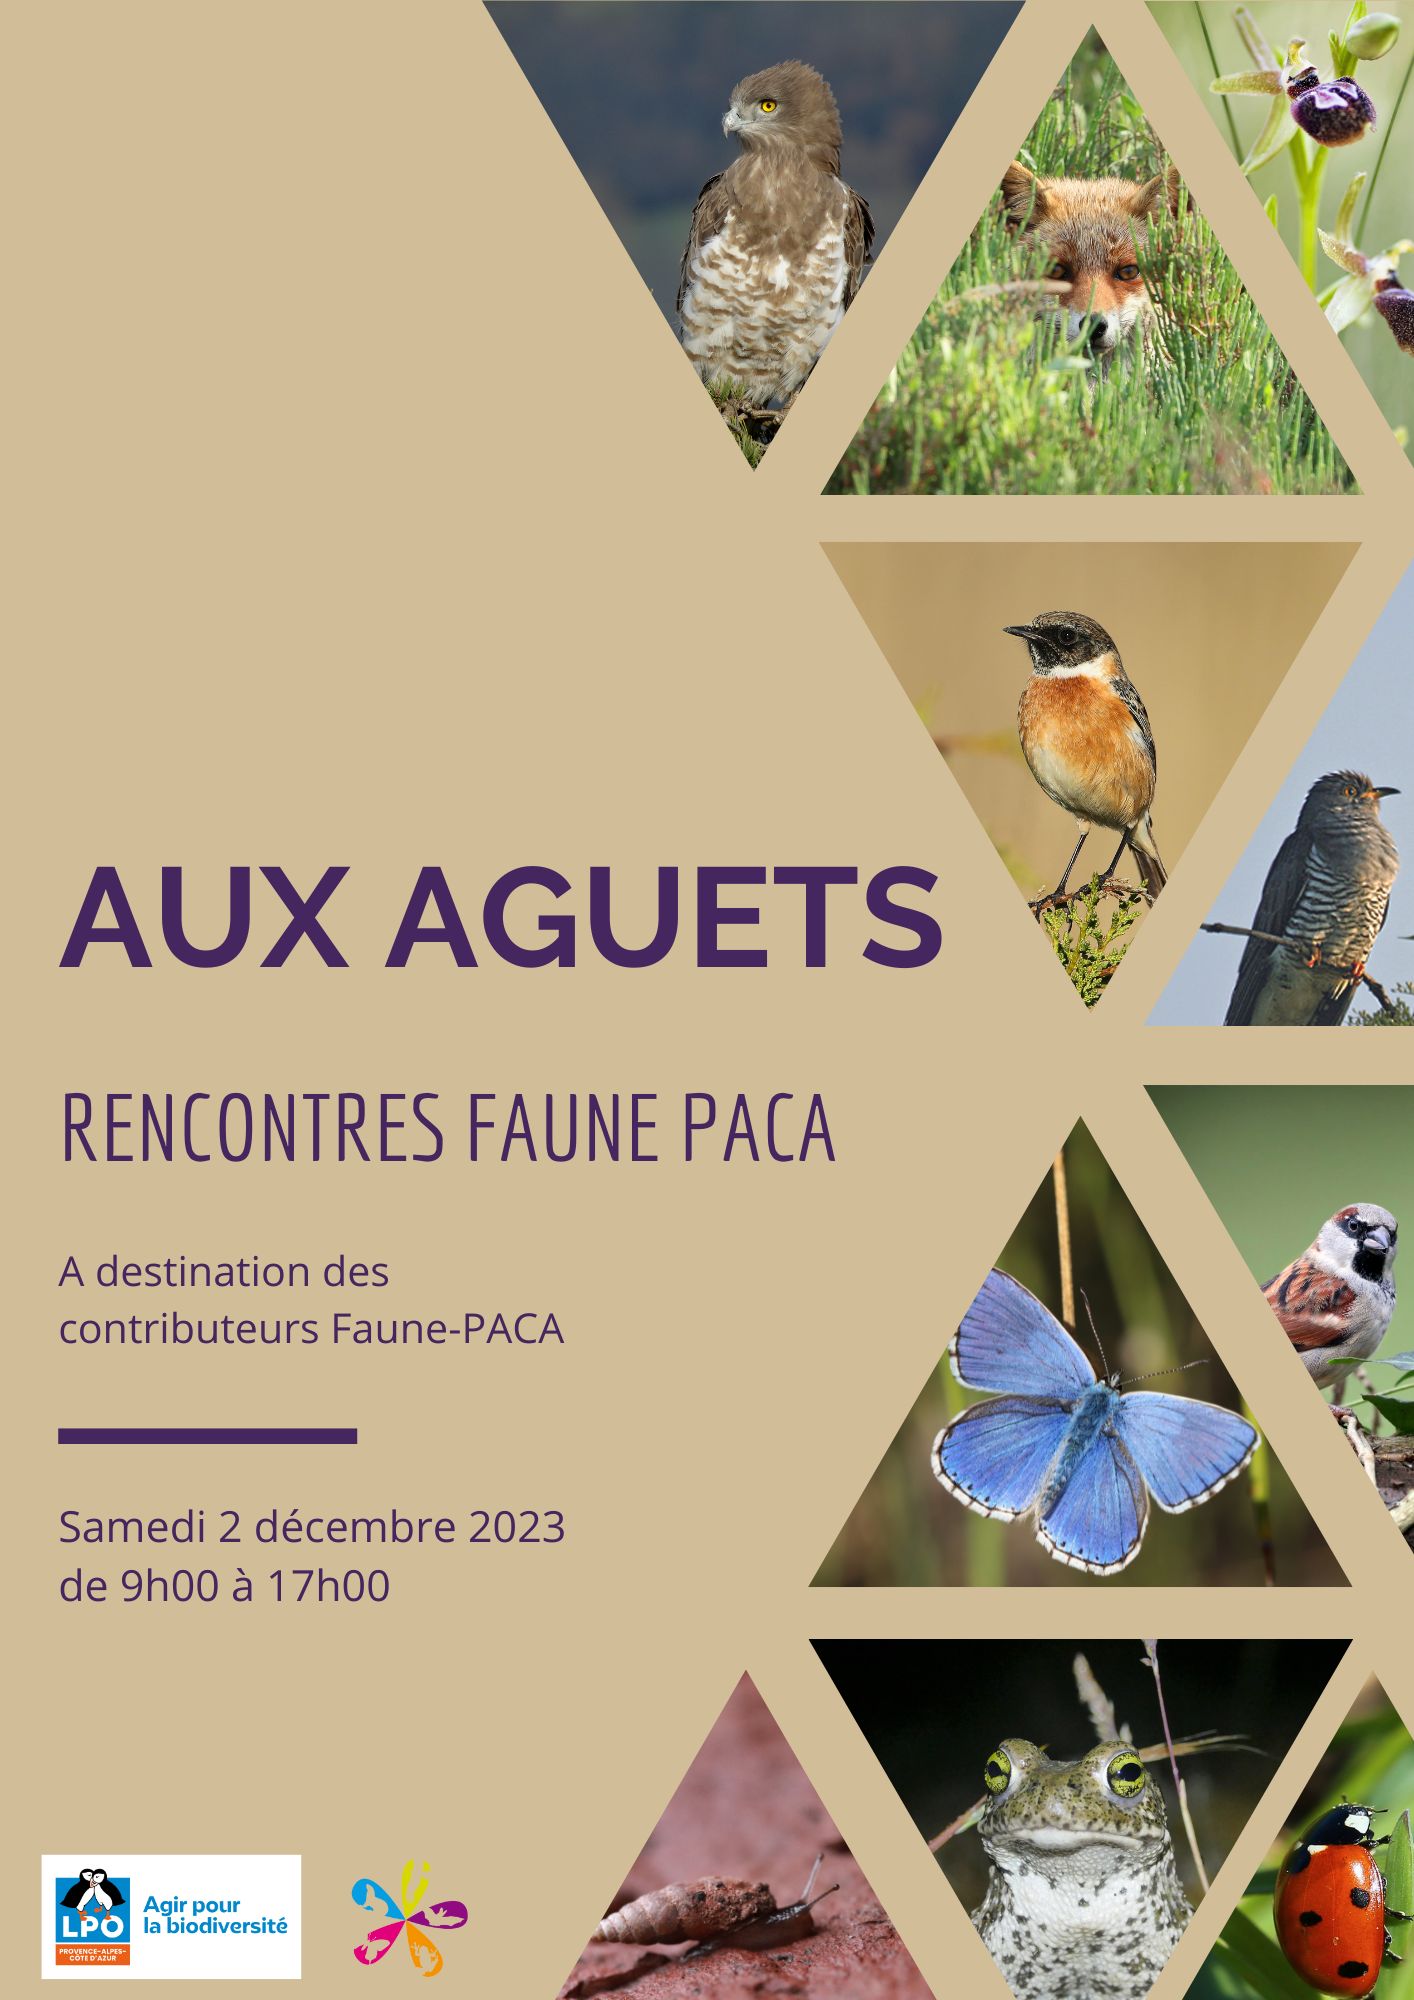 Save the date Rencontre Faune-Paca